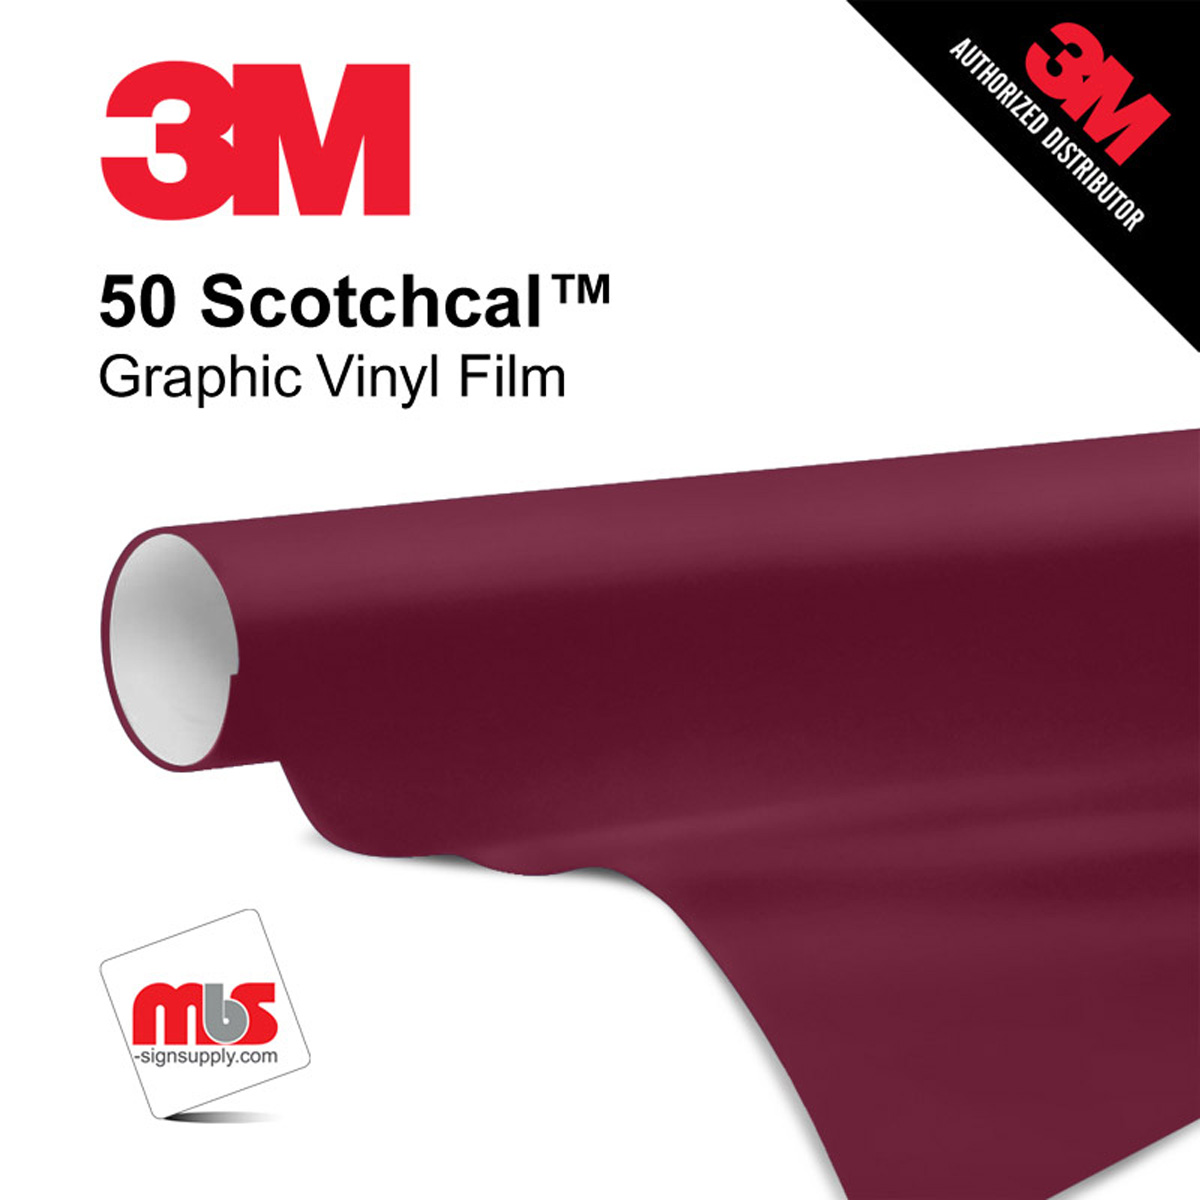 30'' x 50 Yards 3M™ Series 50 Scotchcal Gloss Burgundy 5 Year Punched 3 Mil Calendered Graphic Vinyl Film (Color Code 049)